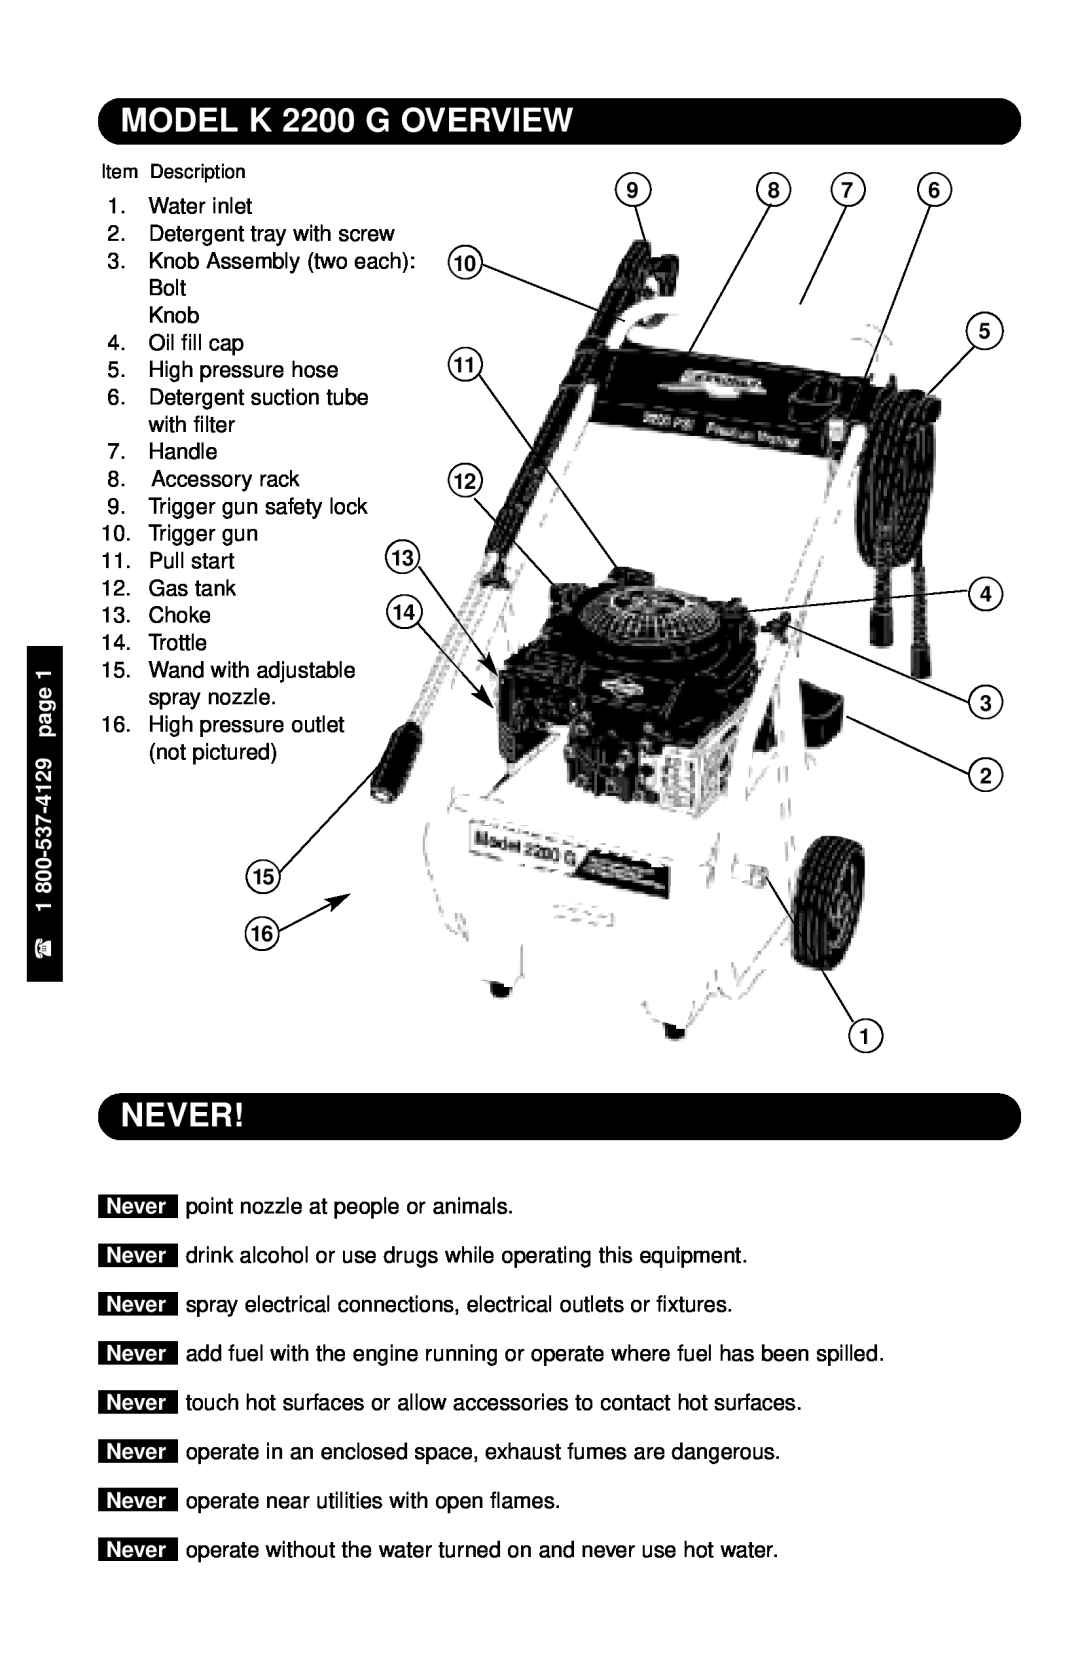 Karcher specifications MODEL K 2200 G OVERVIEW, Never, page 